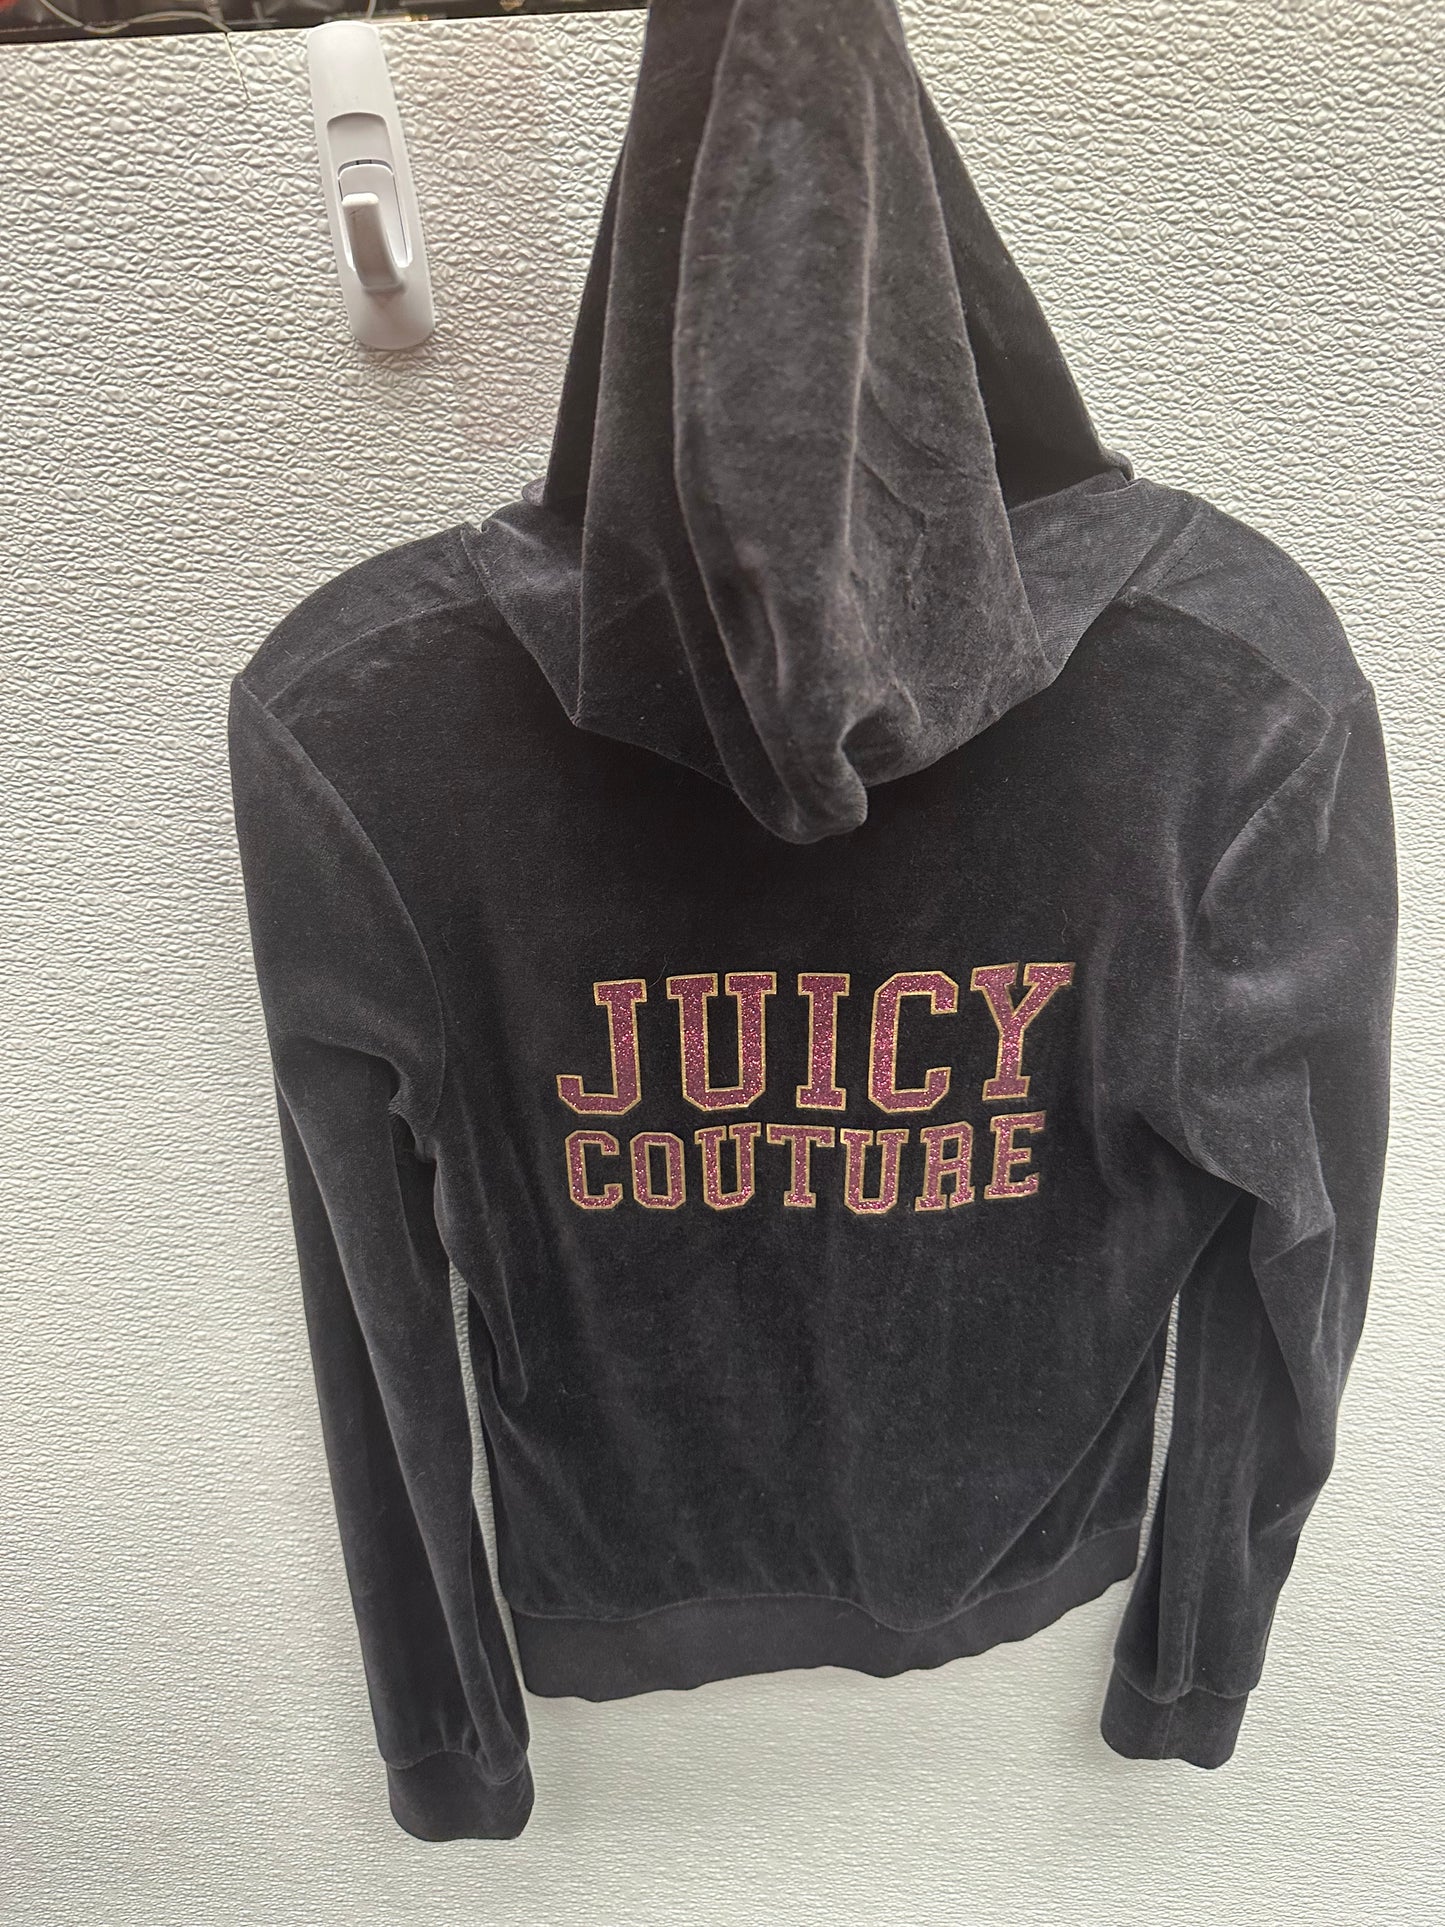 Jacket Other By Juicy Couture  Size: M